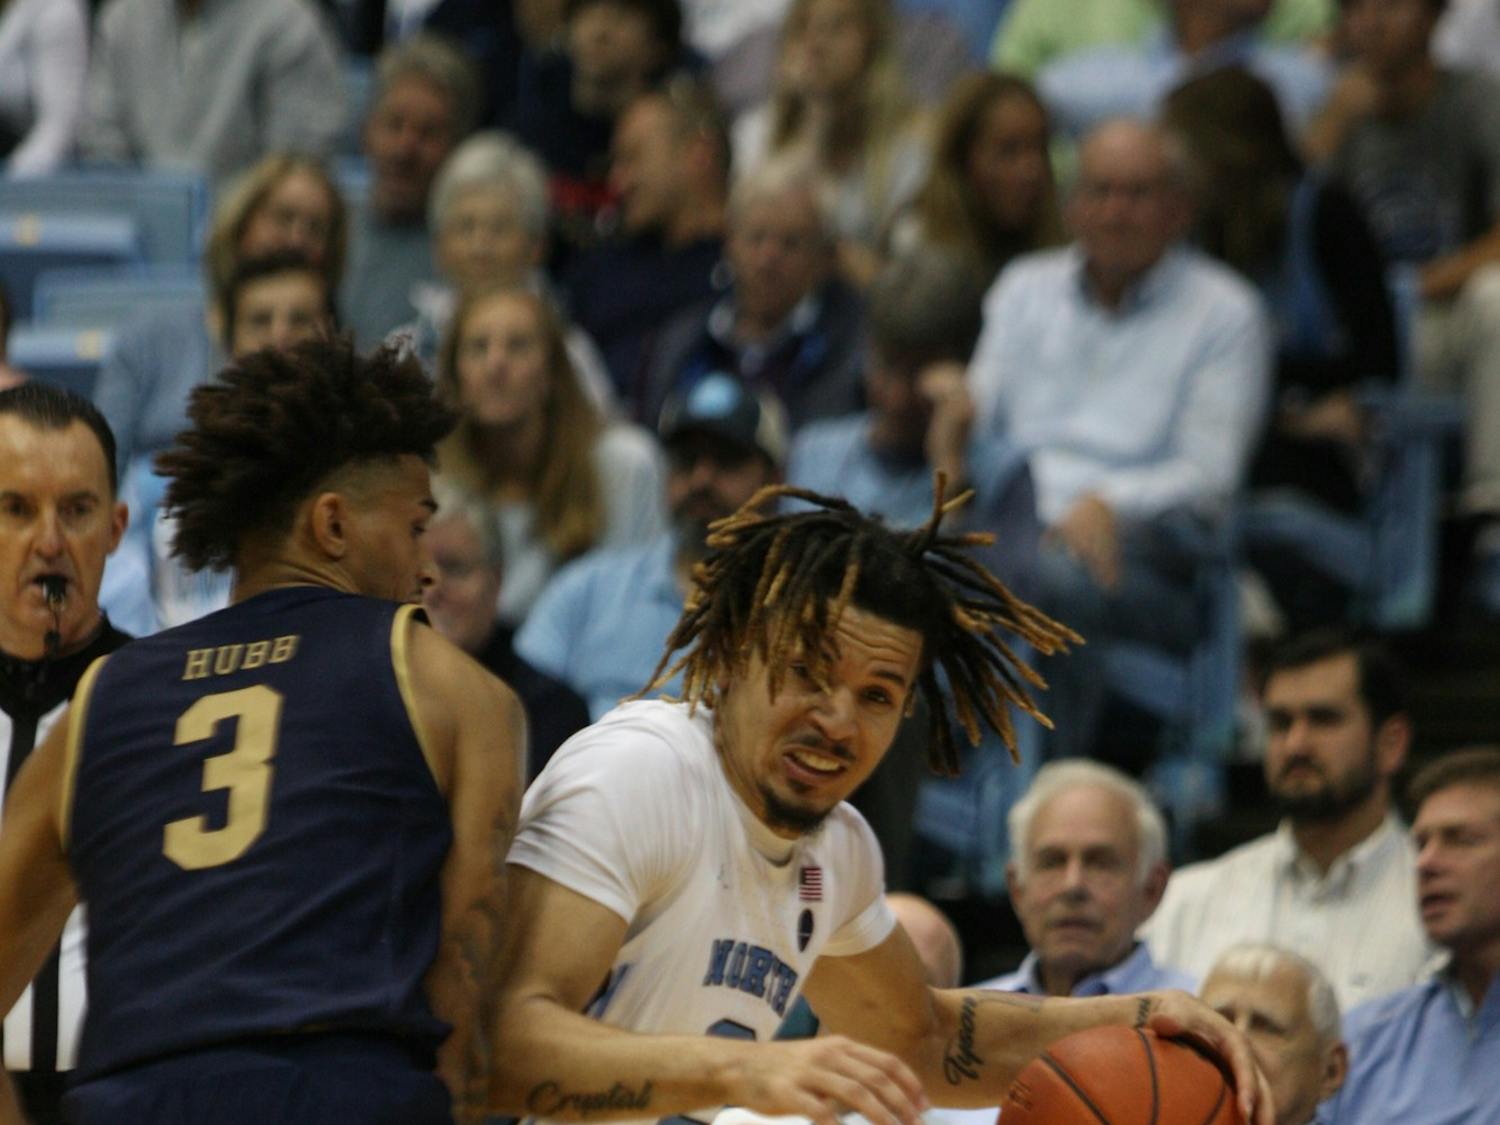 UNC guard Cole Anthony (2) drives past Notre Dame's Prentiss Hubb (3) on Nov. 6, 2019 in the Dean E. Smith Center. Anthony finished the game with 34 points and 11 rebounds. The Tar Heels beat the Fighting Irish 76-65.